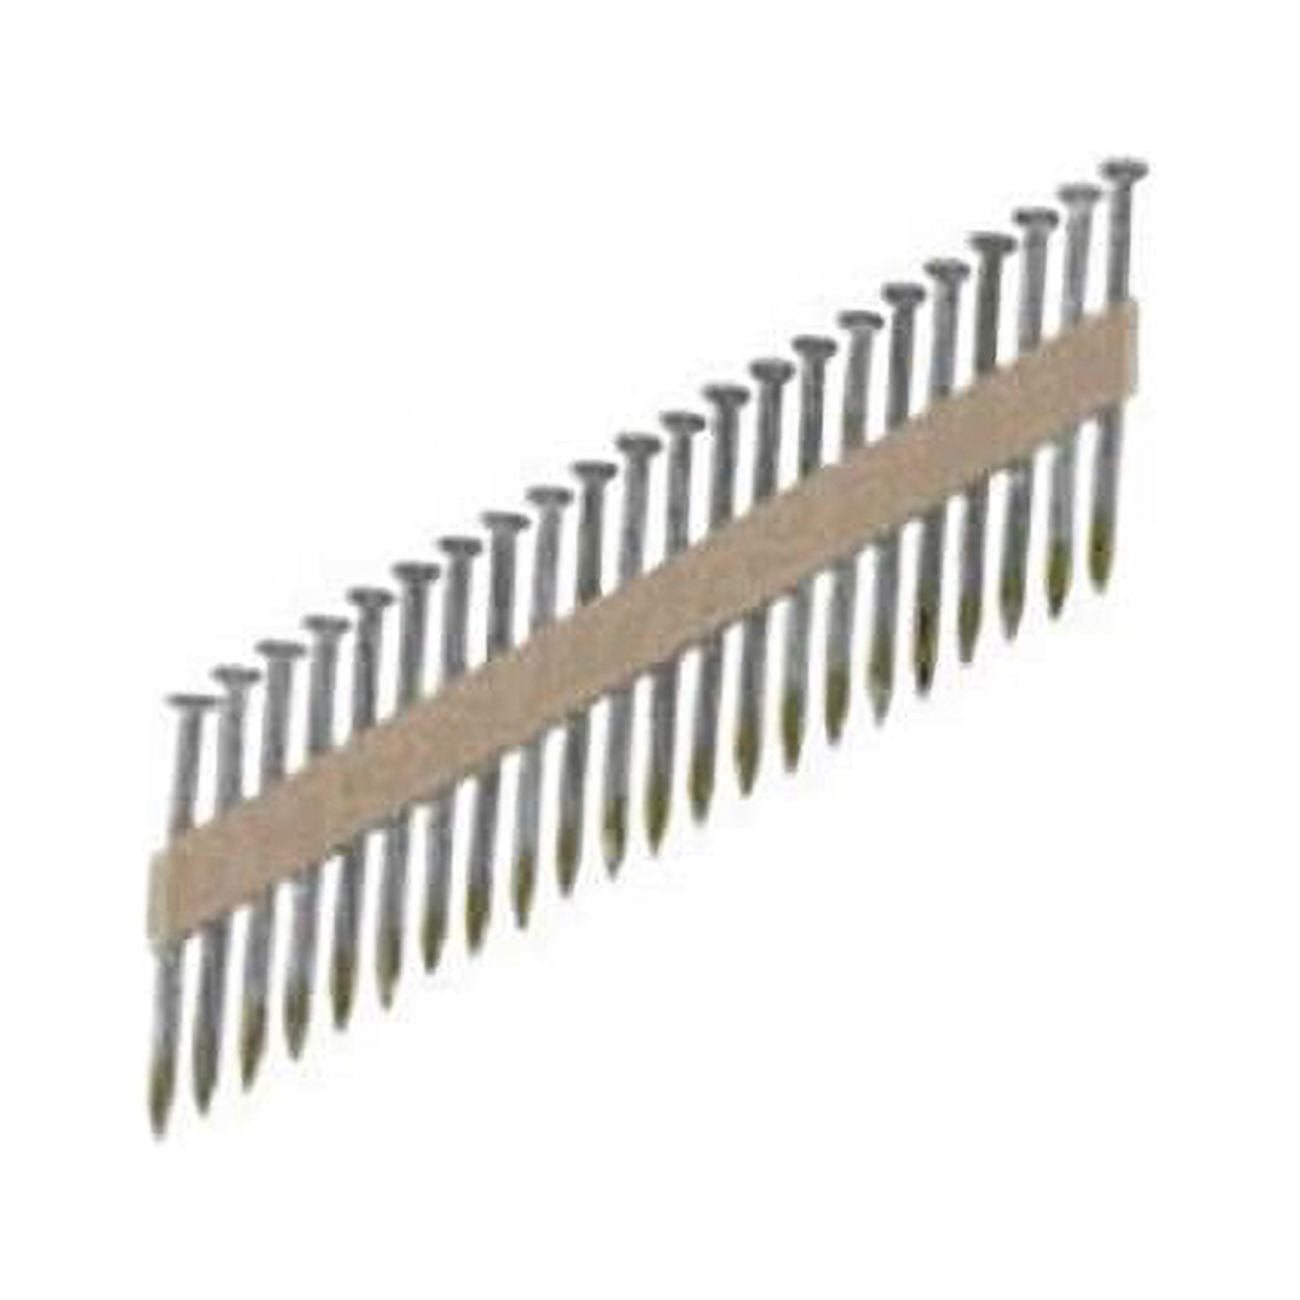 Picture of Metabo power tools 2597276 10 Gauge Smooth Shank Metal Connector Nails with Angled Strip  2.5 in. x 0.162 in. Dia. - Pack of 2000